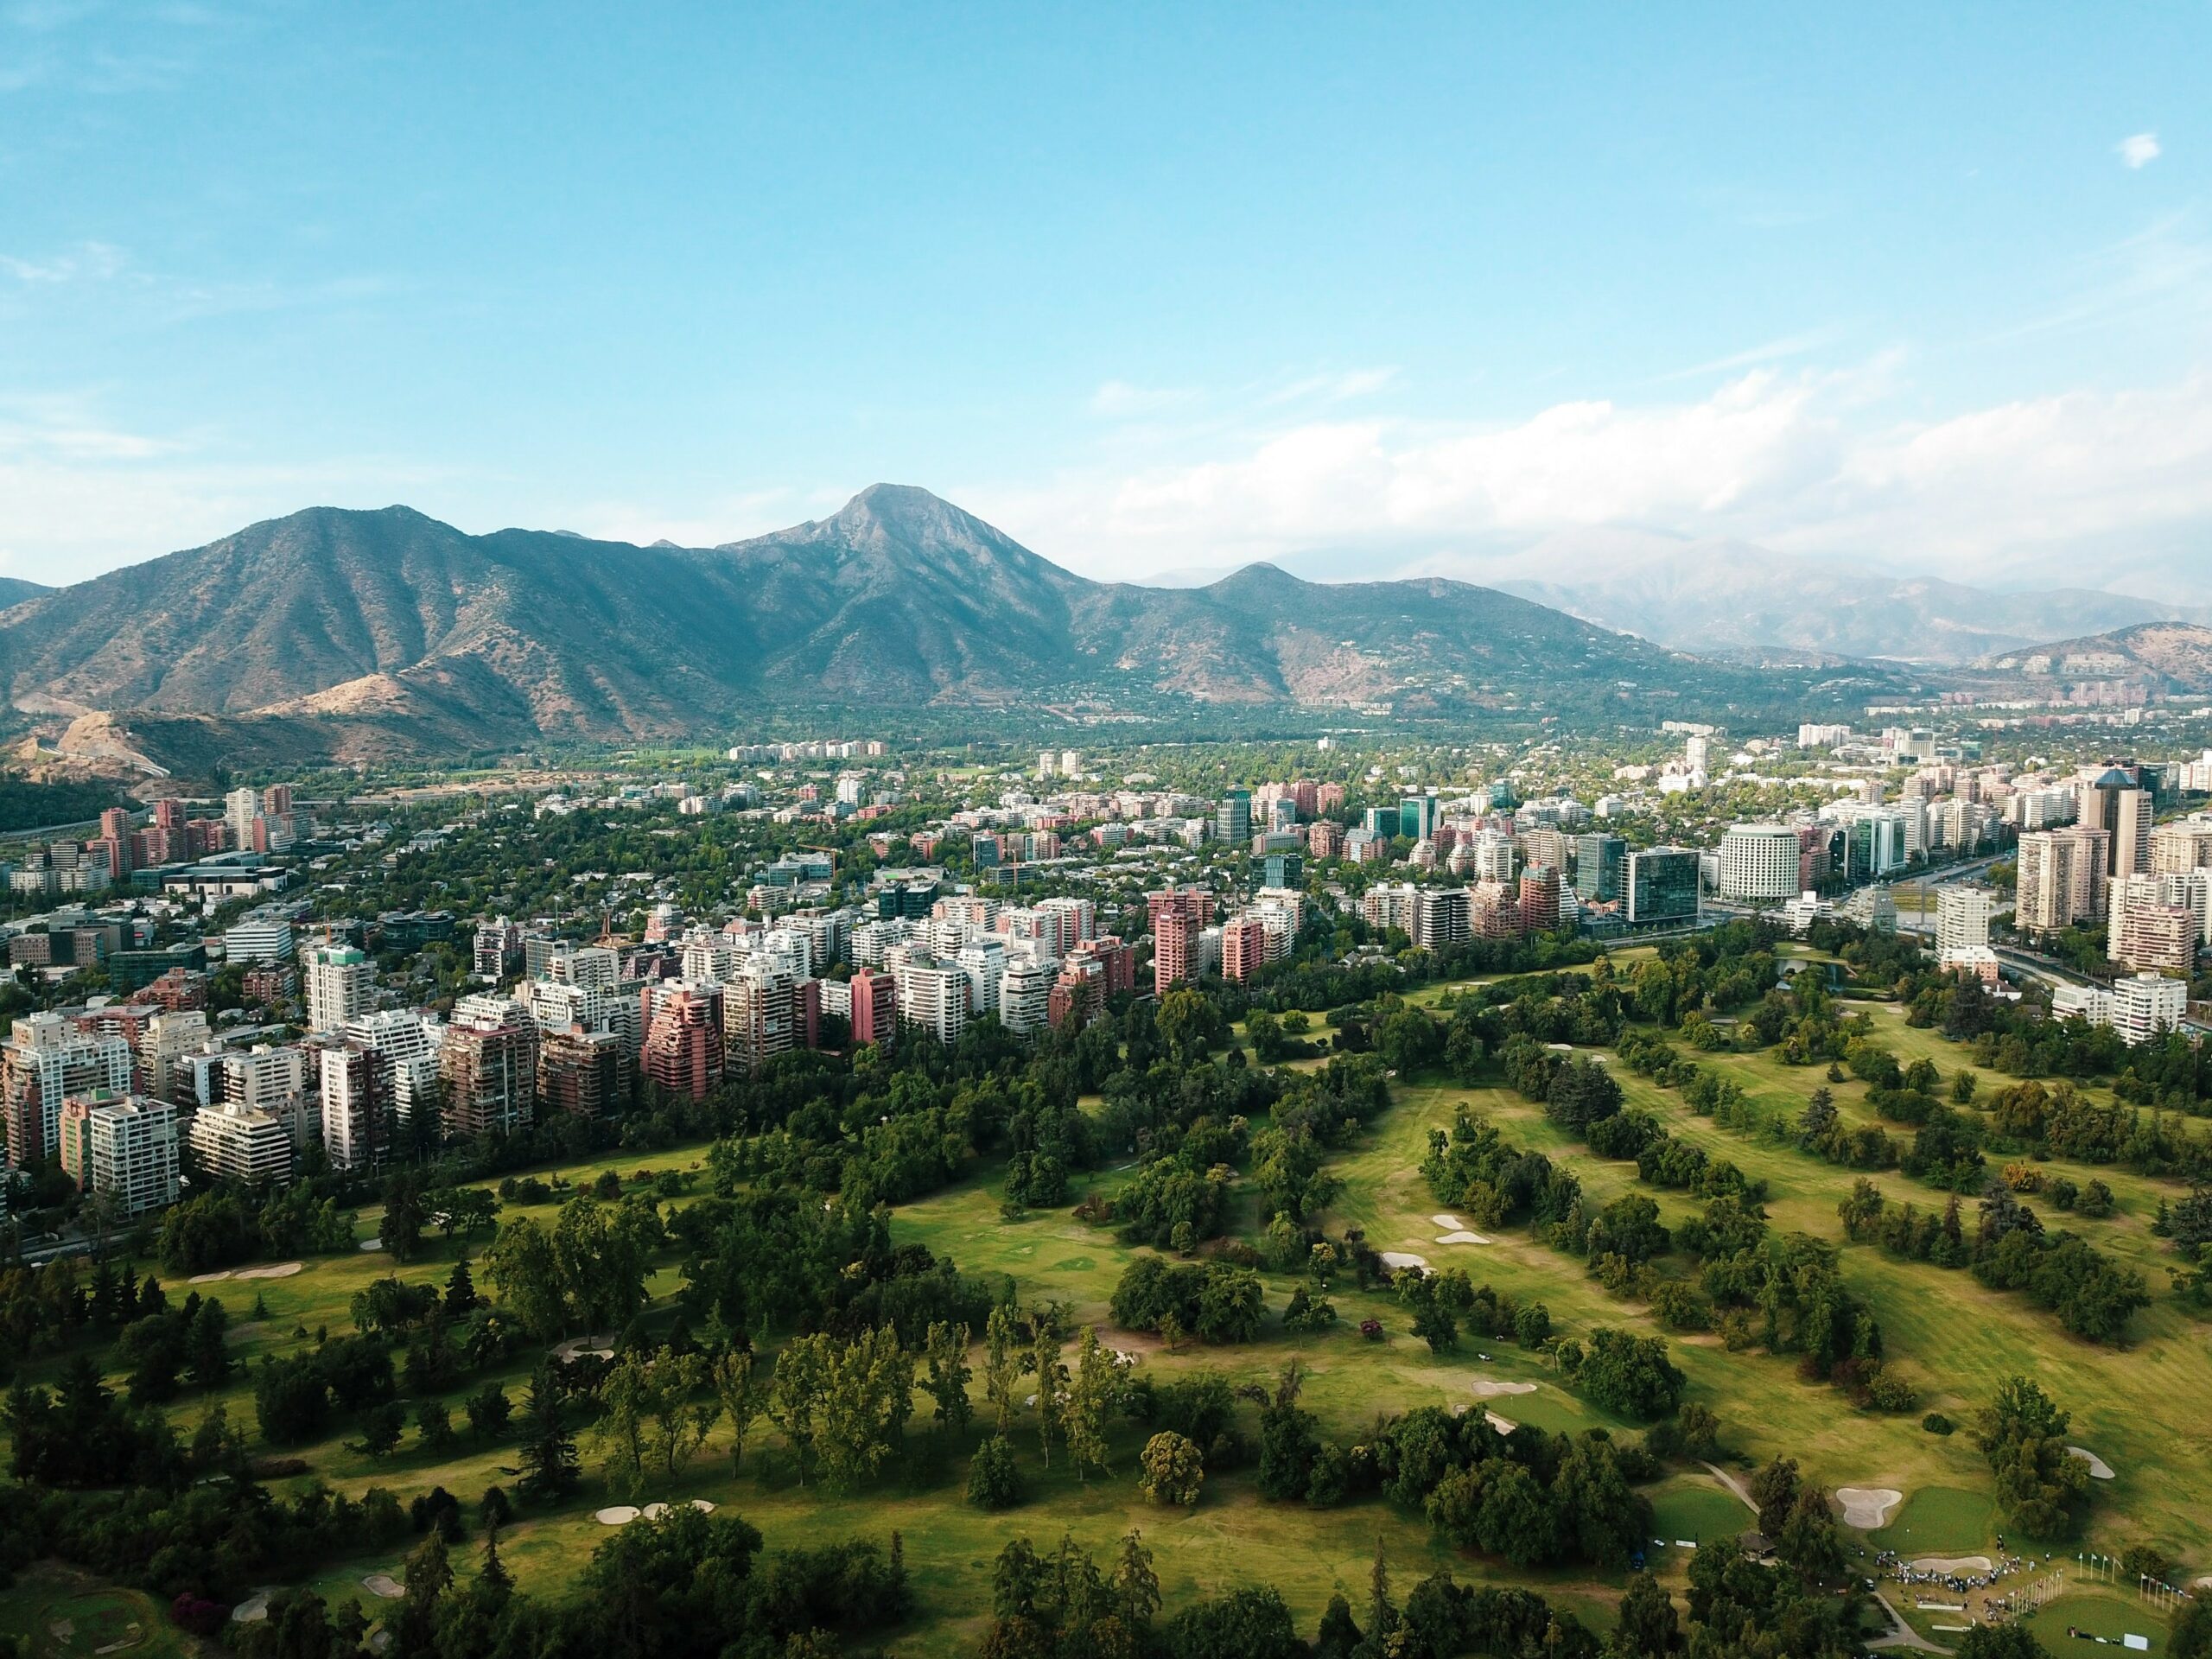 an aerial view of a city with mountains in the background.